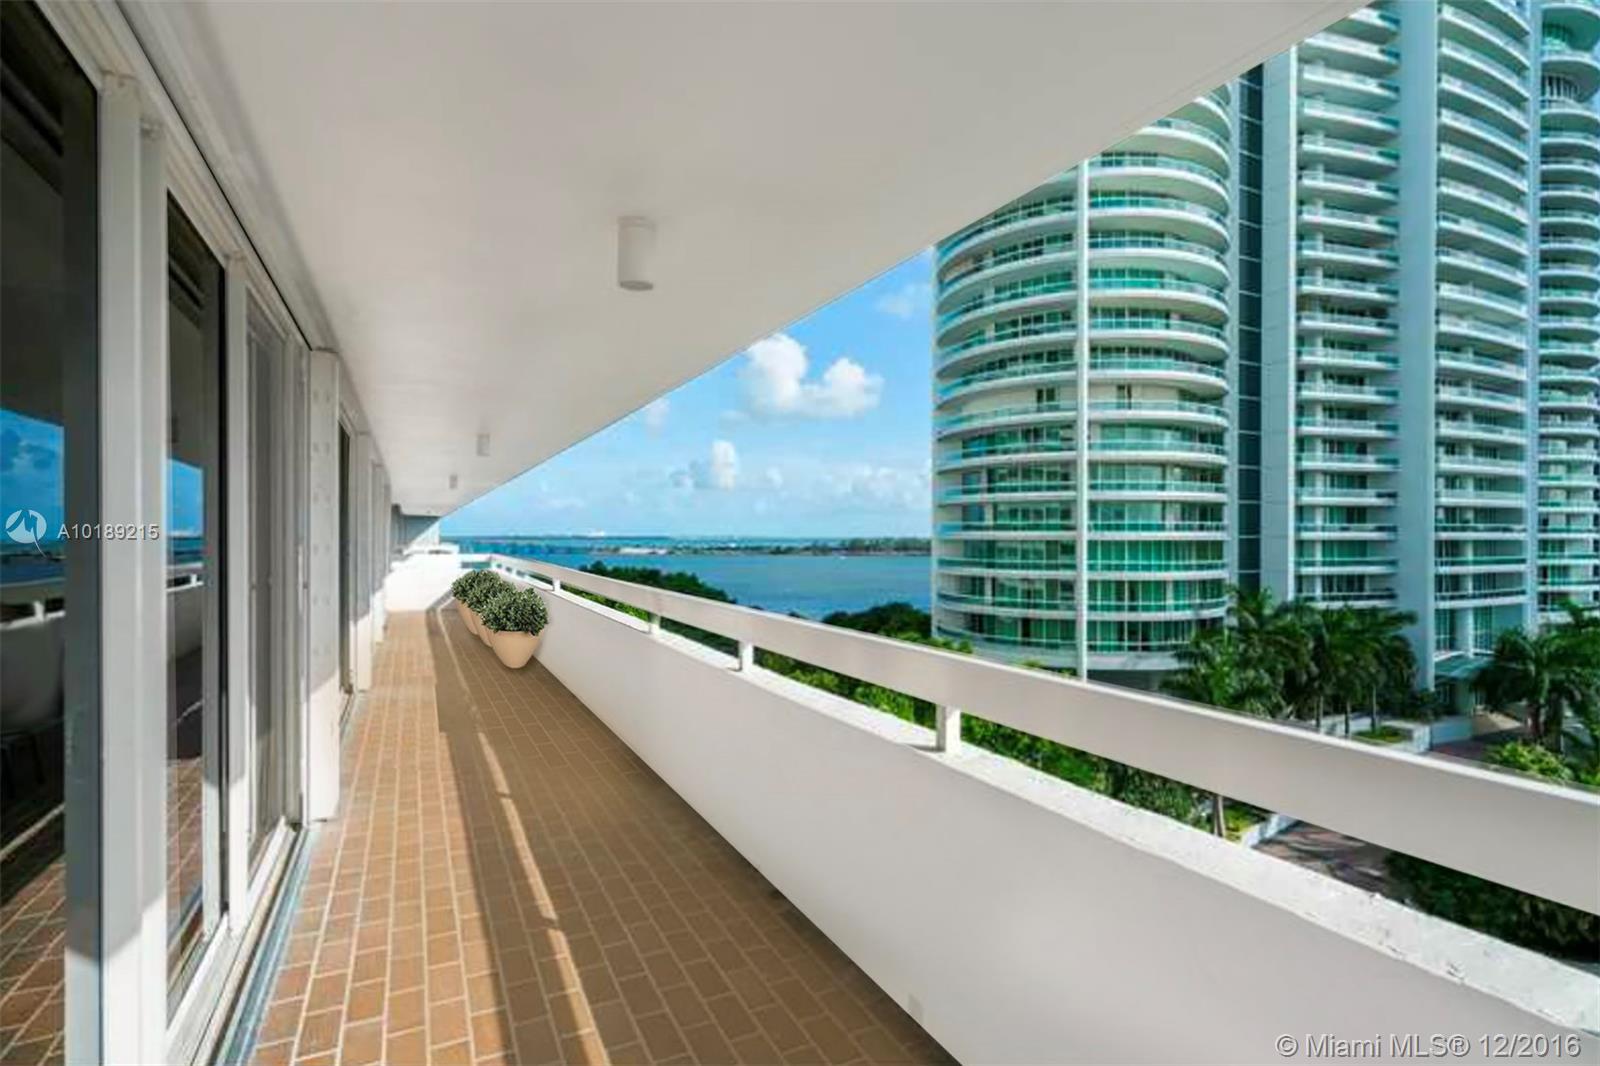 Imperial at Brickell image #2